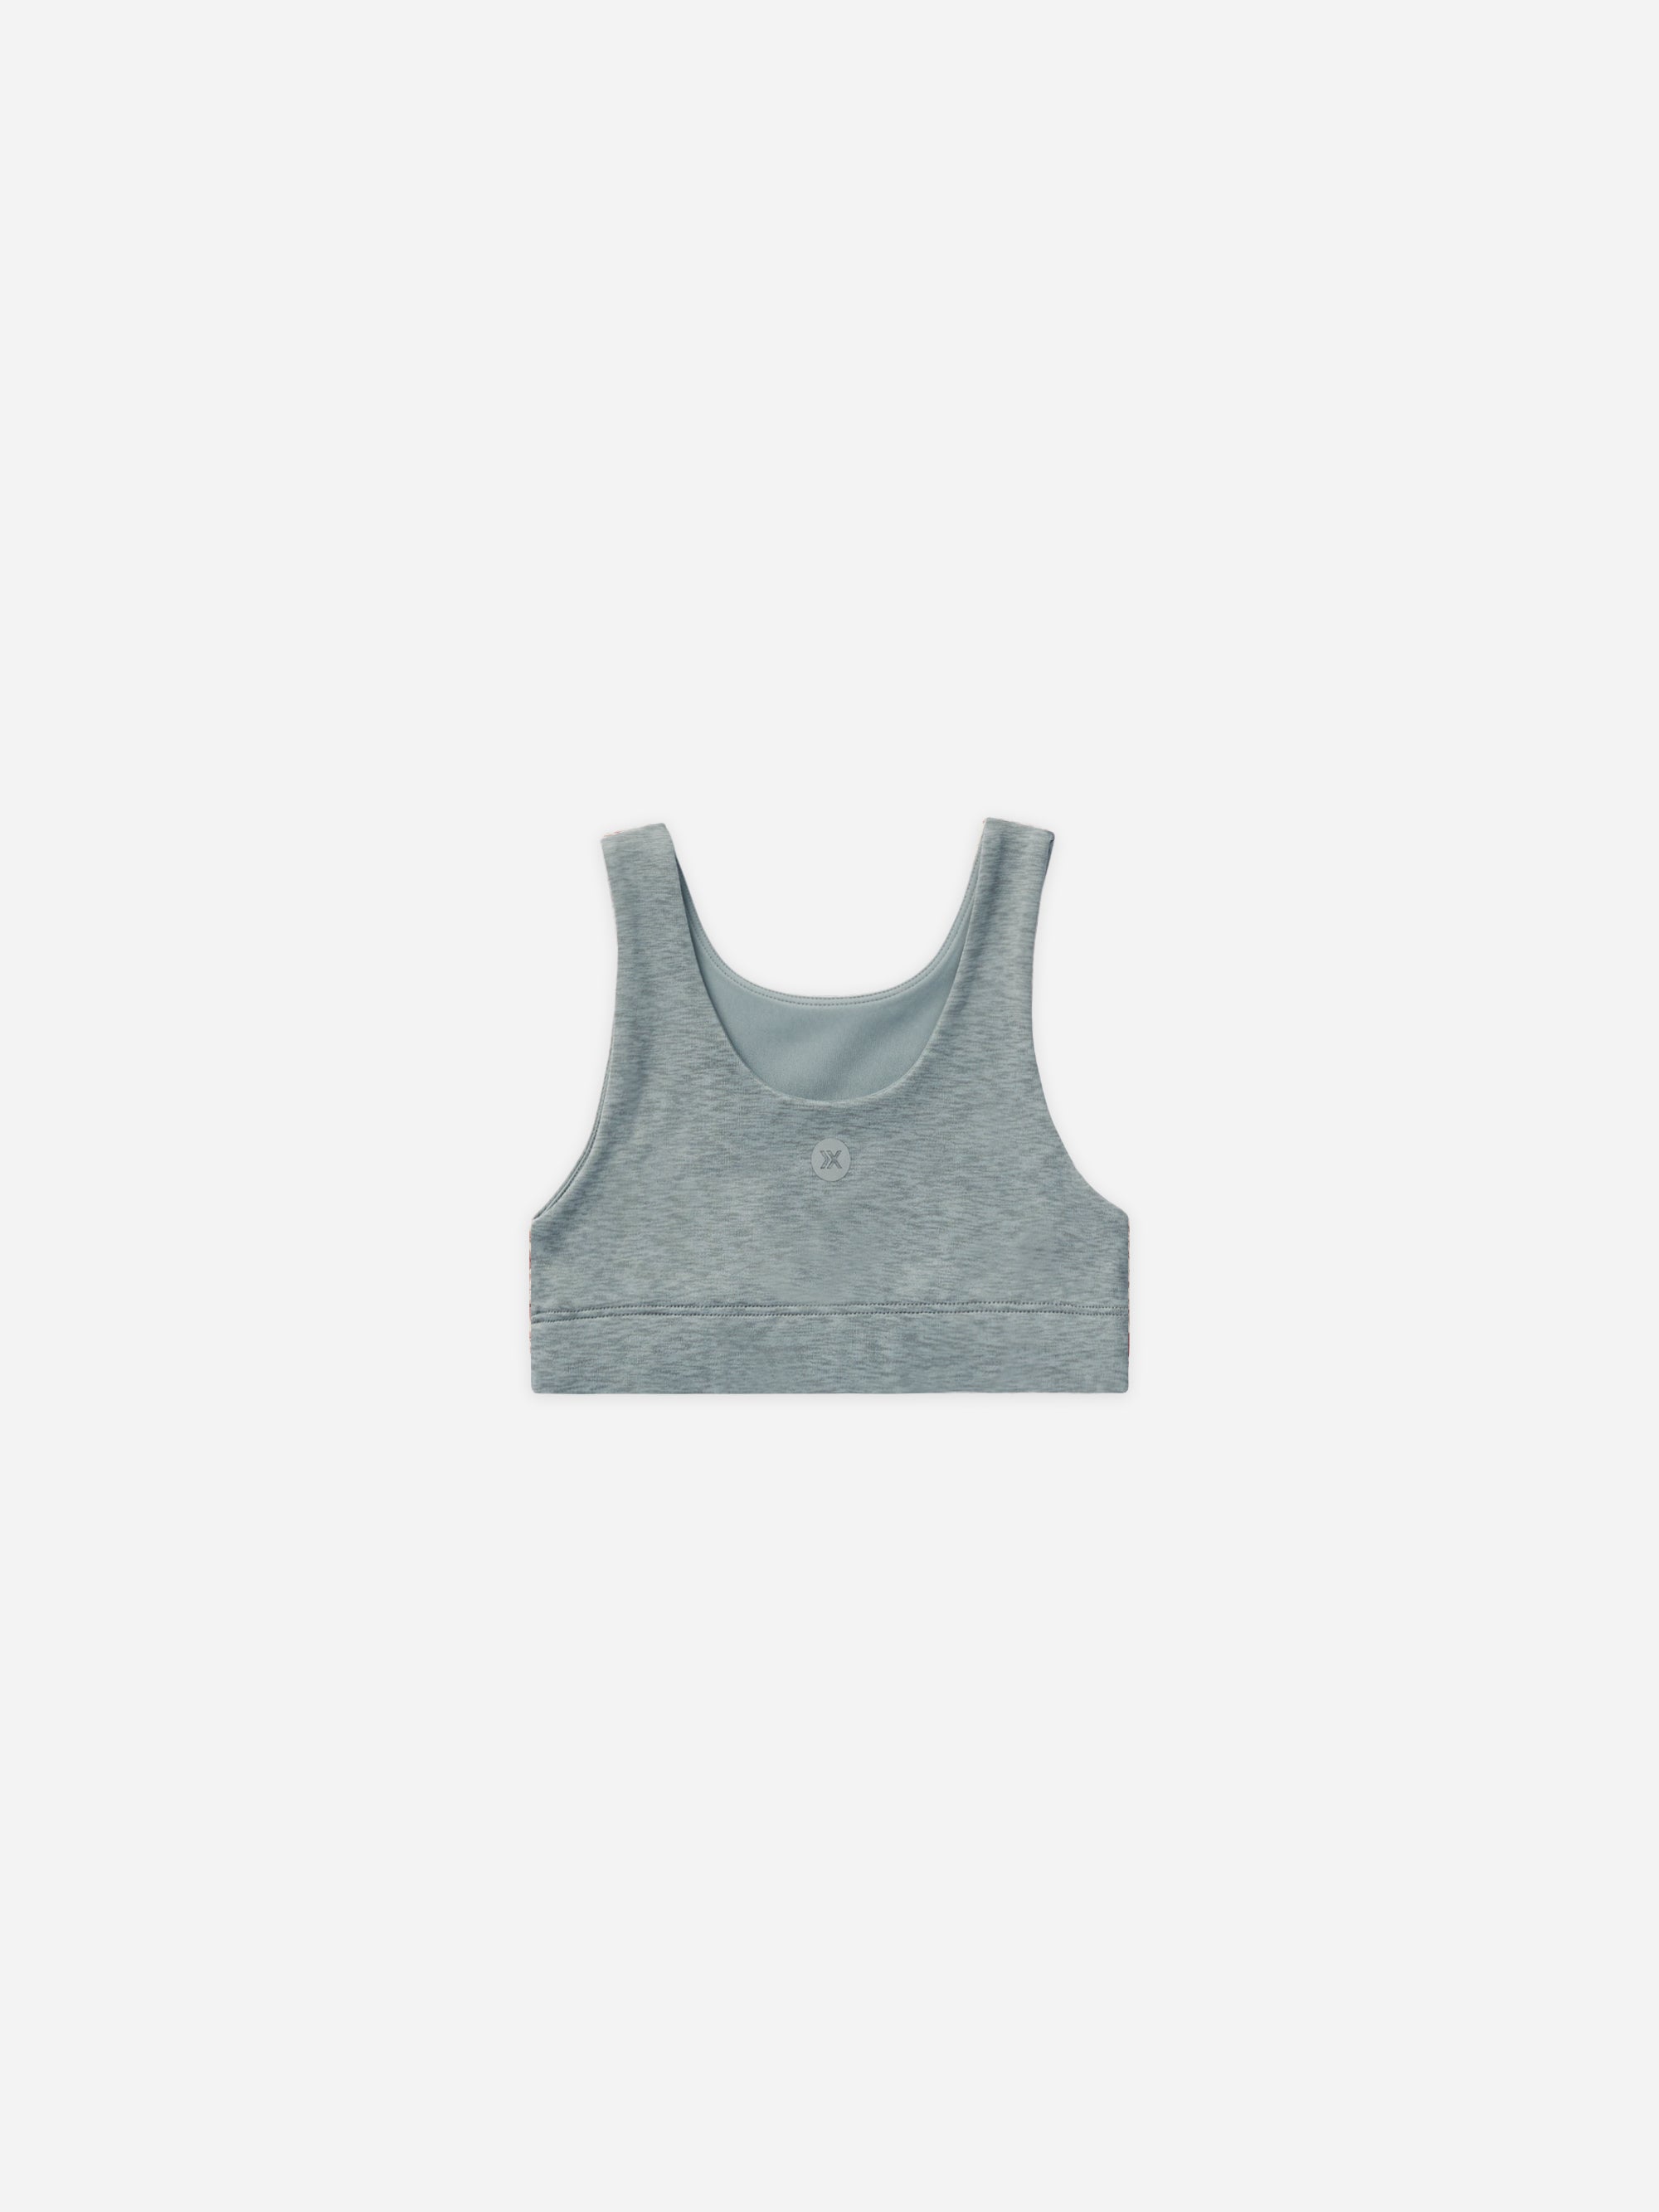 Swift Sports Bra || Heathered Indigo - Rylee + Cru | Kids Clothes | Trendy Baby Clothes | Modern Infant Outfits |